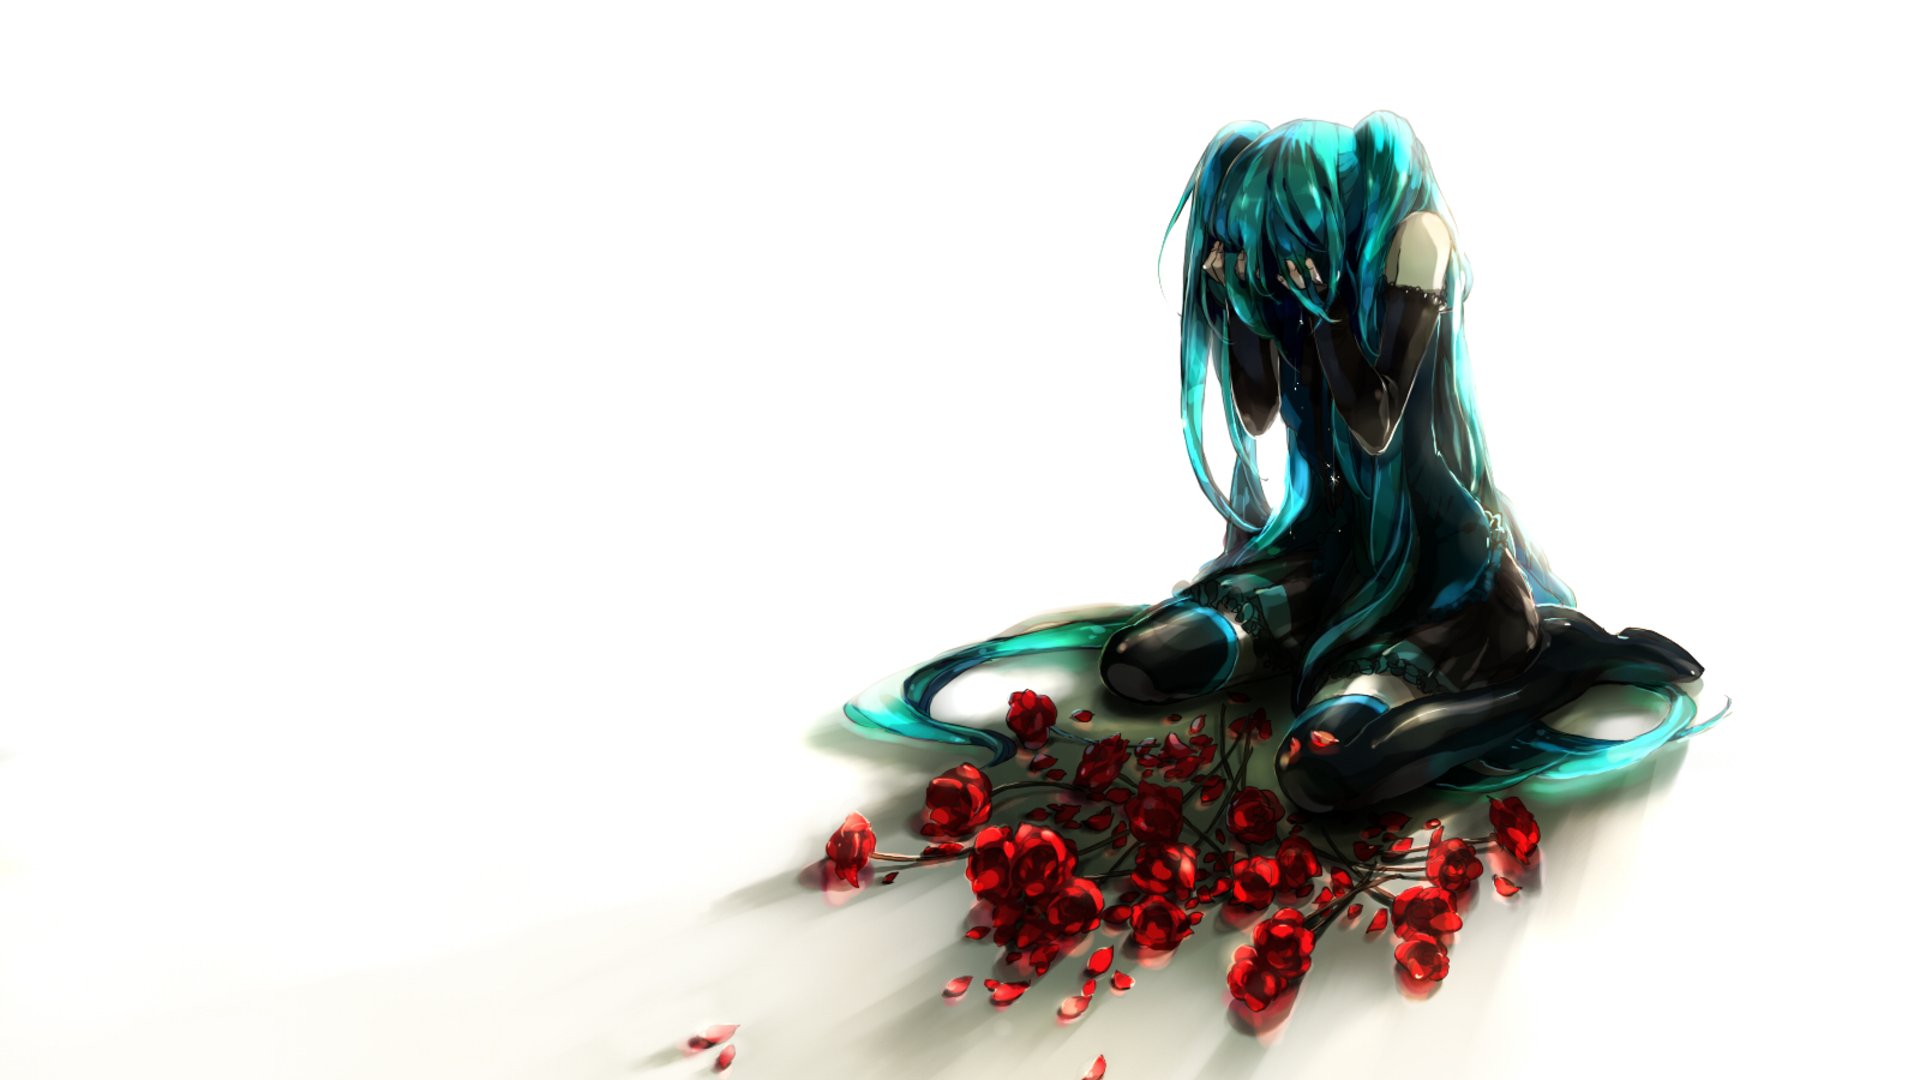 vocaloid, Flowers, Hatsune, Miku, Long, Hair, Lonely, Flower, Petals, Roses, Anime, Girls, Detached, Sleeves Wallpaper